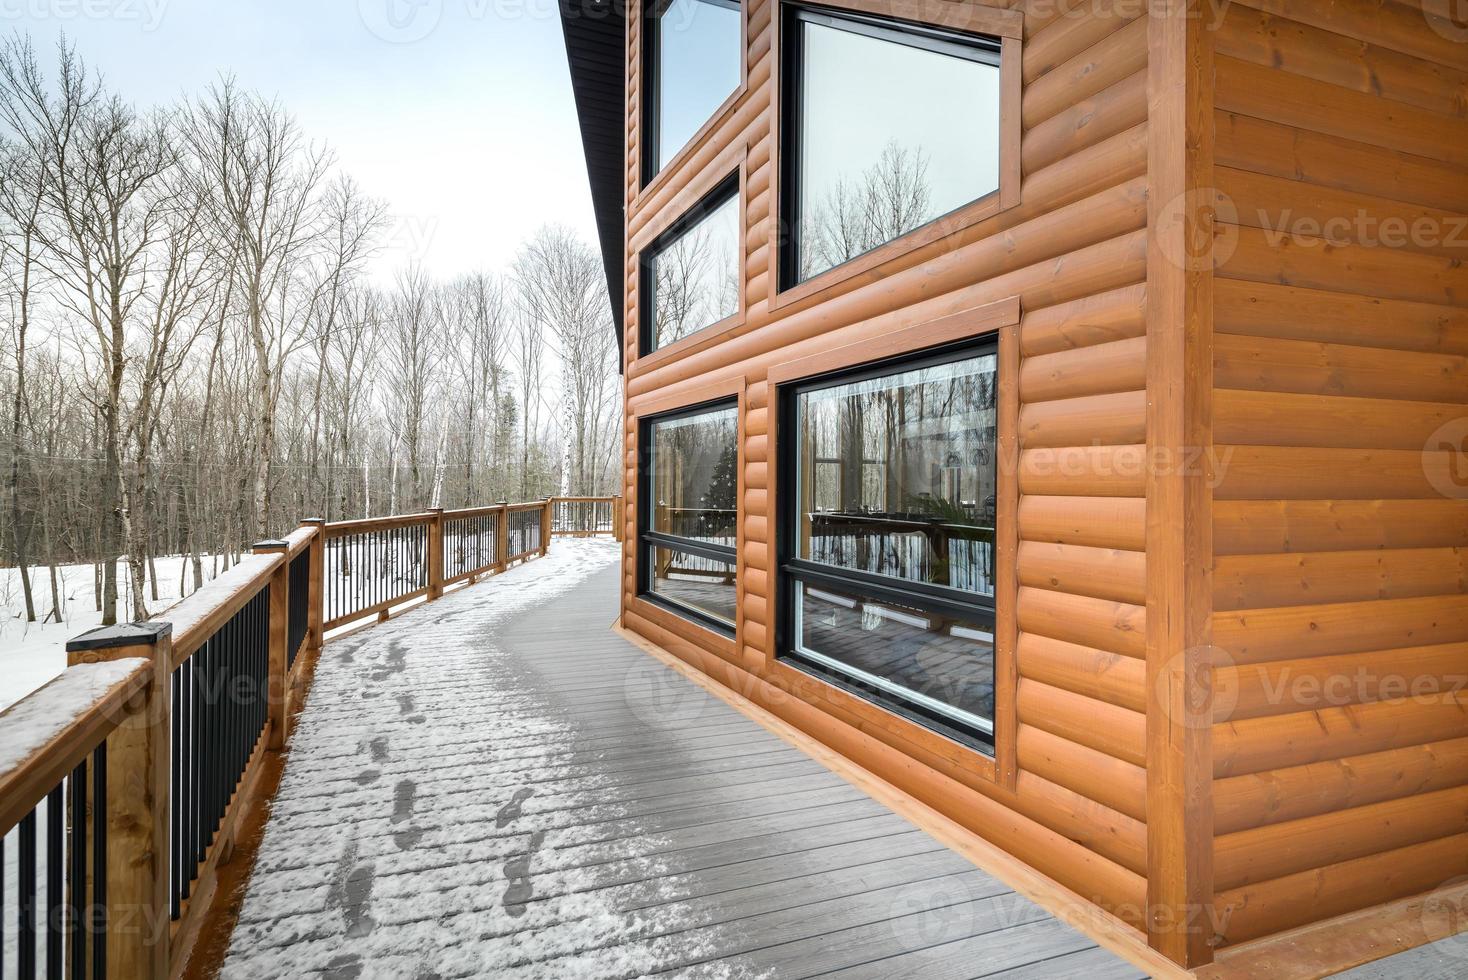 Winter cottages in remote area Quebec, Canada, log house with sauna, SPA, bedrooms, pool, living room, messanine, kitchen and bathrooms photo